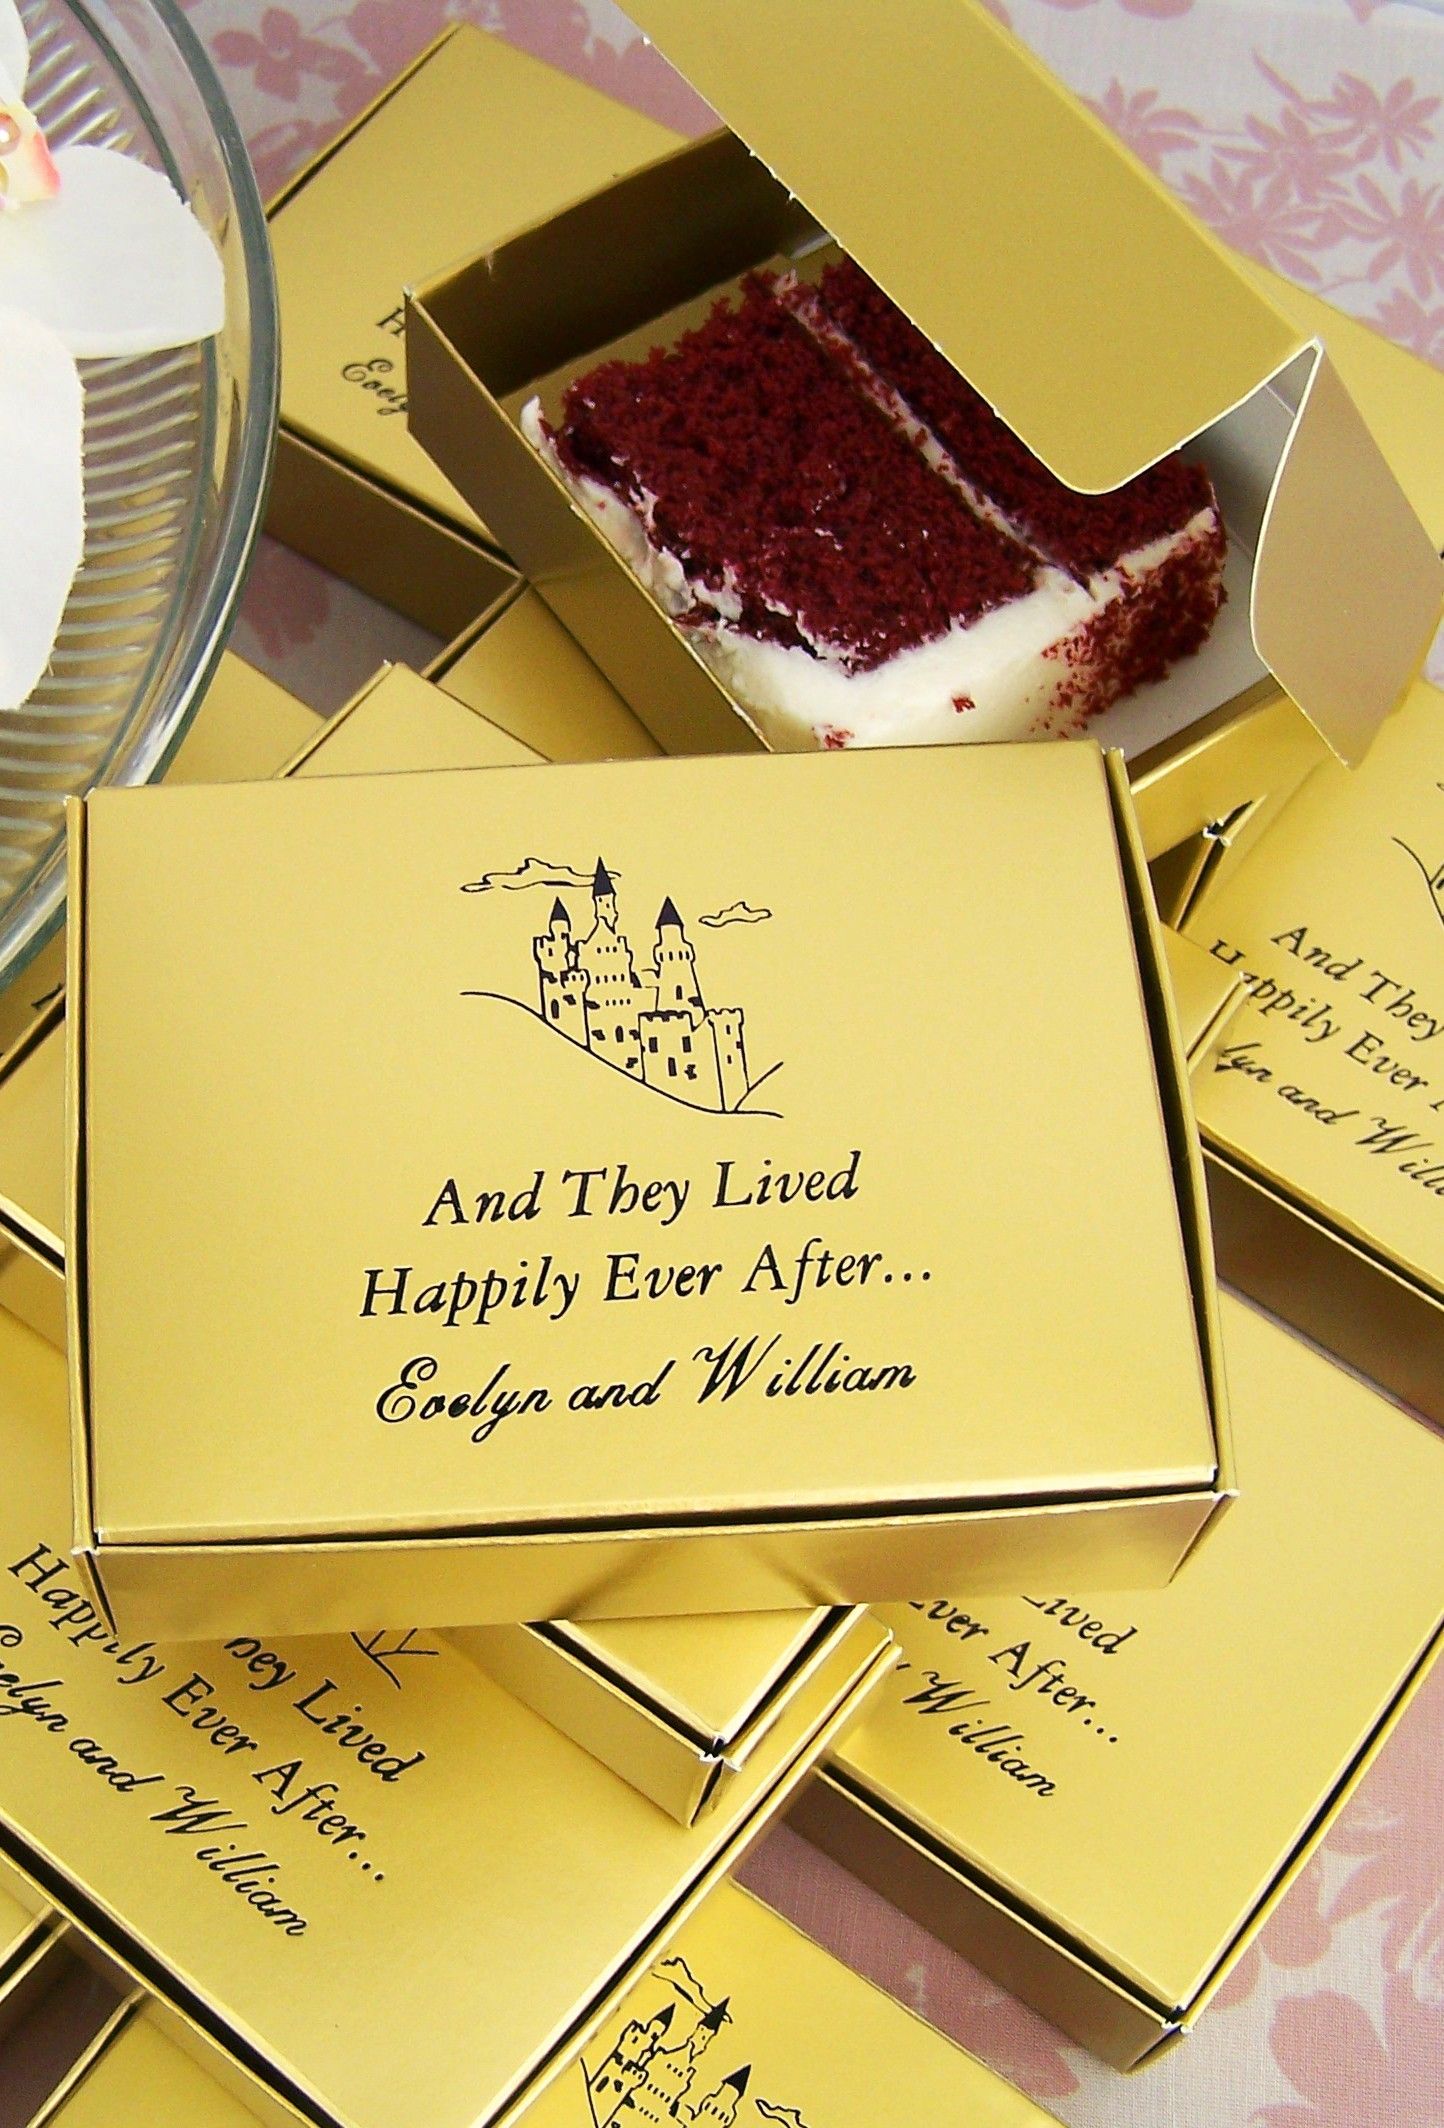 5 x 4 Cake Slice Favor Boxes Personalized